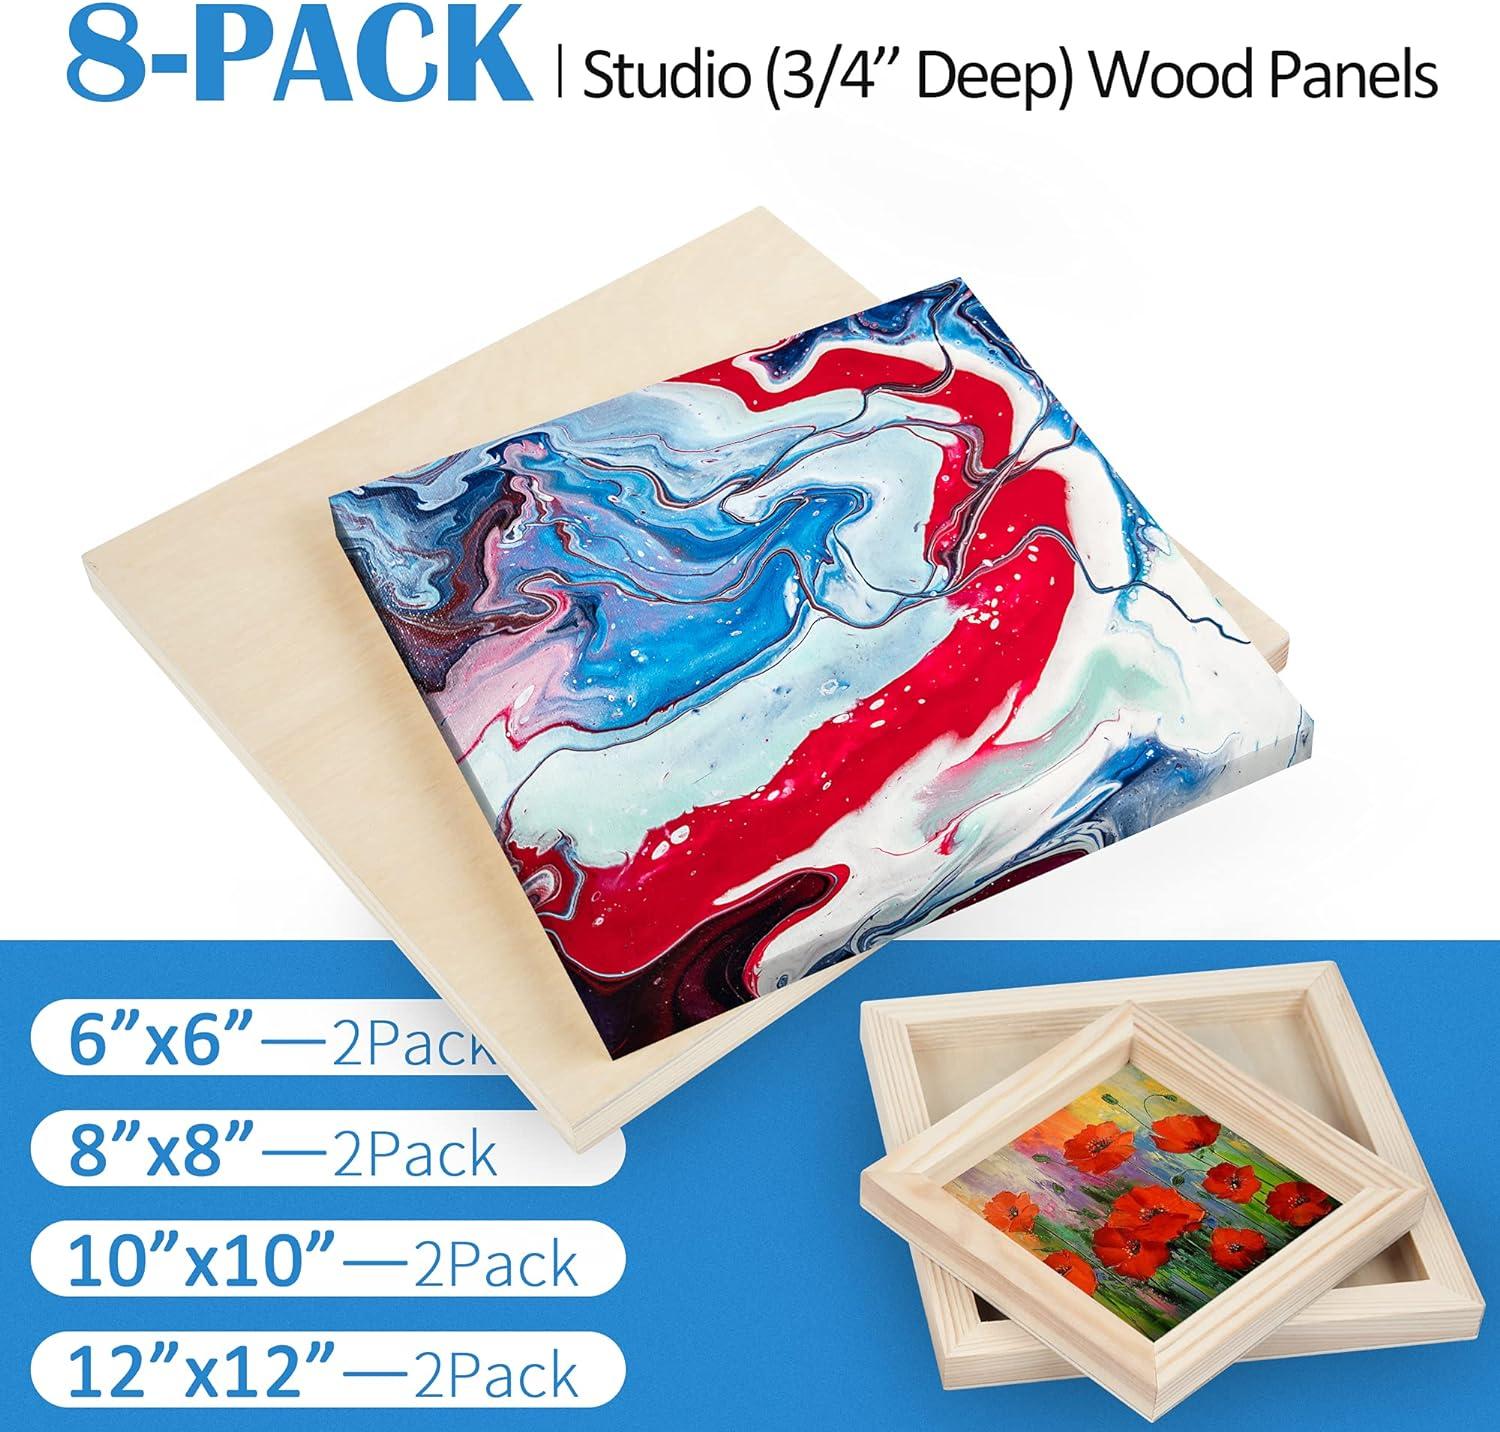 Buy Canvas Boards for Painting 12 Pack - 8 inch x 10 inch Artist